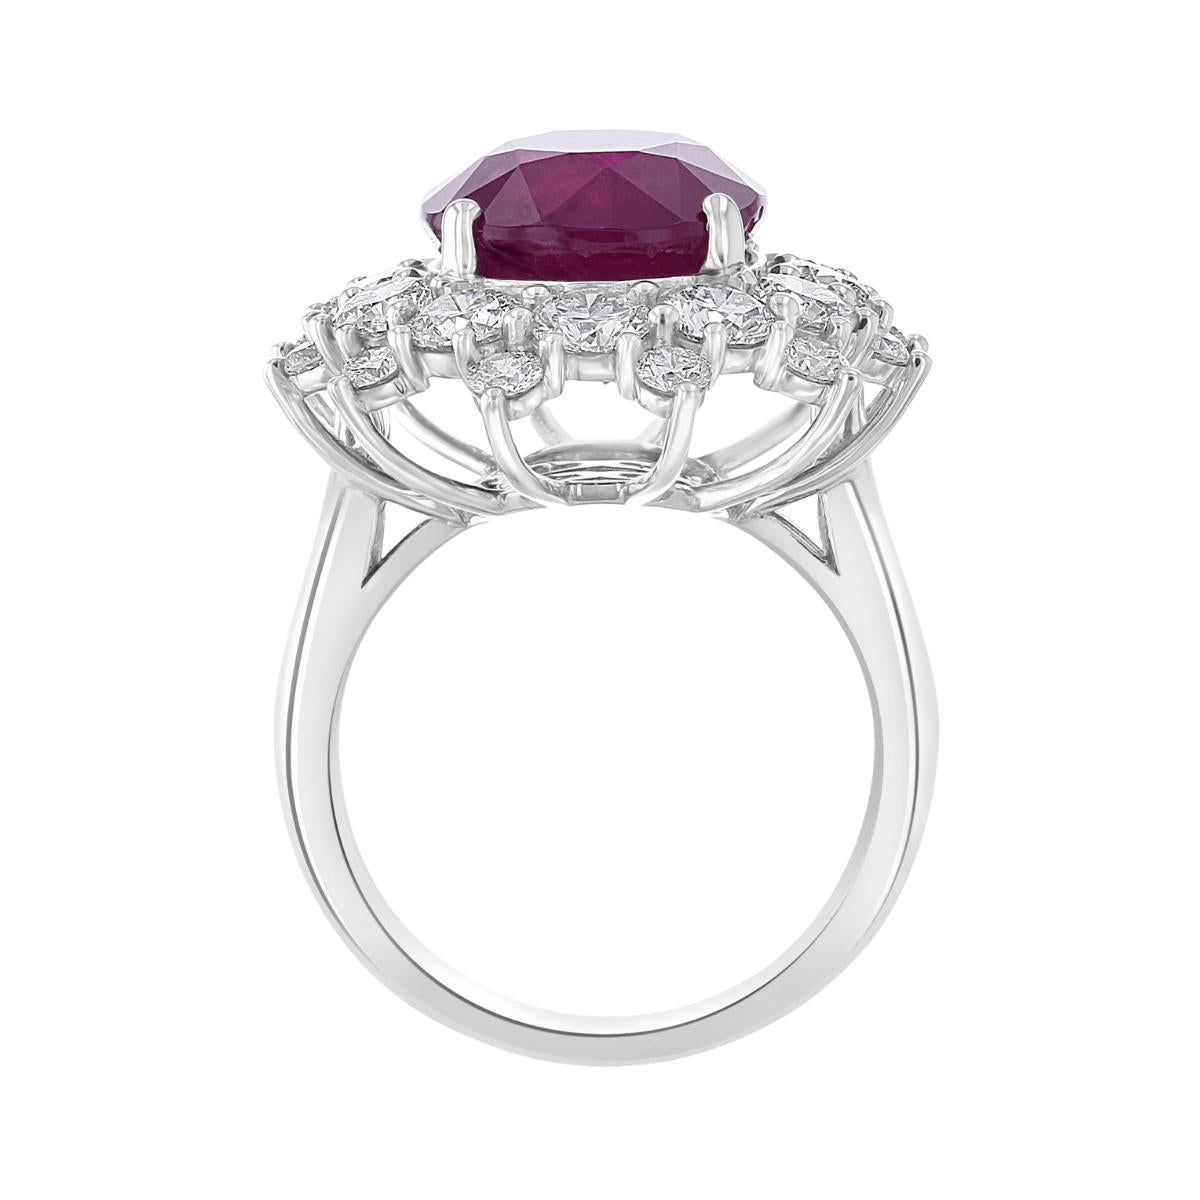 18KT GOLD 10.33 CT RUBY & 3.53 CTW DIAMOND OVAL HALO RING 4,4.5,5,5.5,6,6.5,7,7.5,8,8.5,9